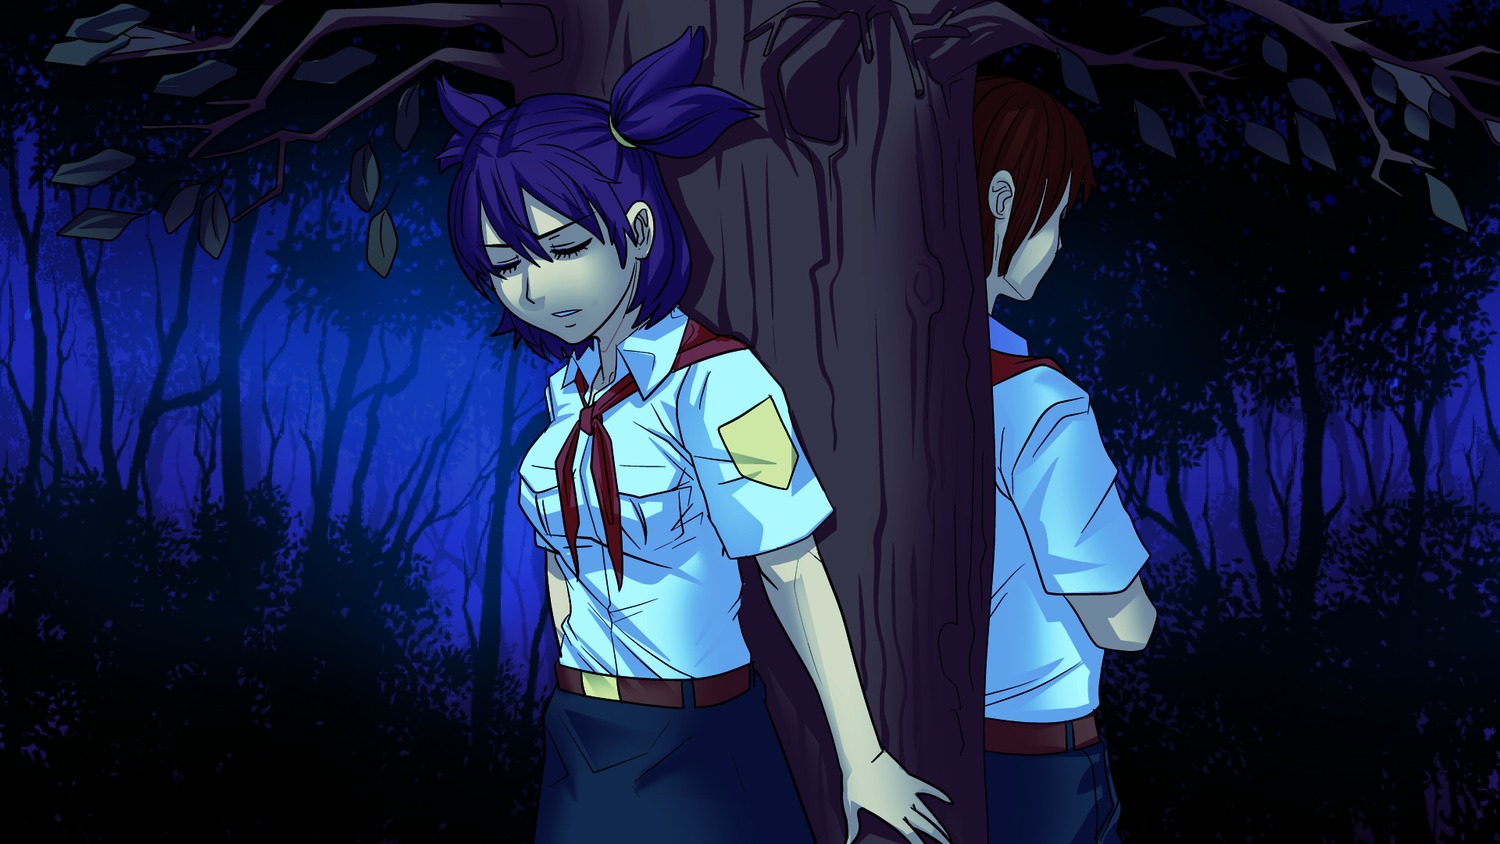 1boy brown_hair closed_eyes eroge forest game_cg highres nature necktie night outdoors pioneer pioneer_necktie pioneer_uniform purple_hair semyon_(character) shirt short_hair tree twintails unyl-chan